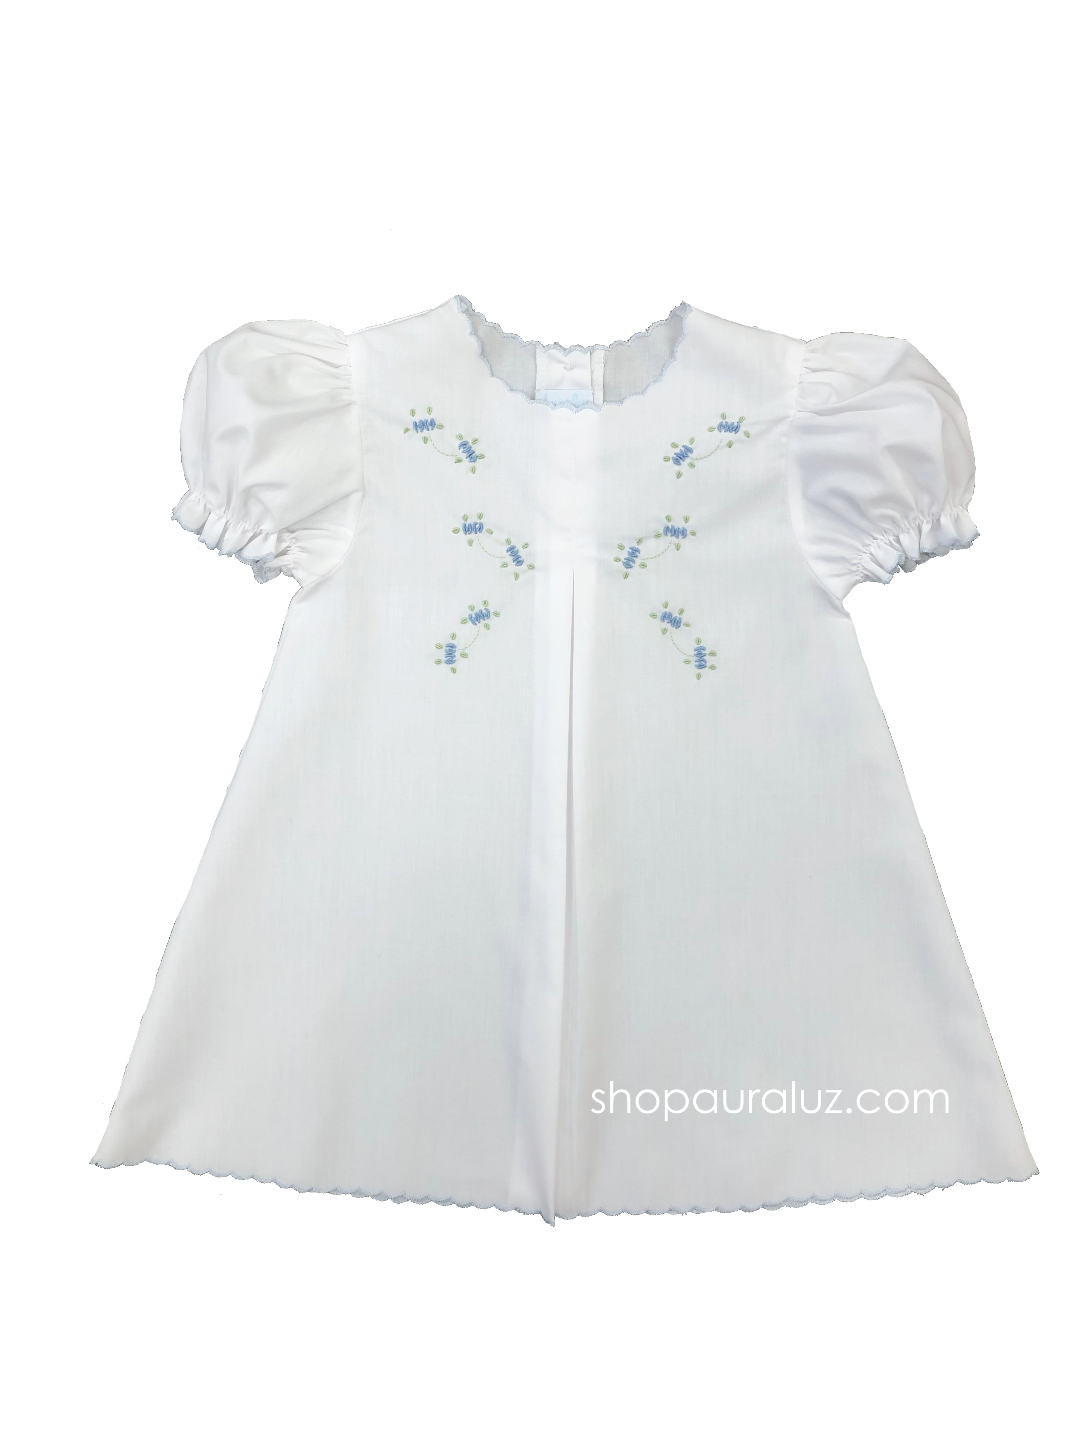 Auraluz Baby Dress...White with blue scallop trim and embroidered tiny buds